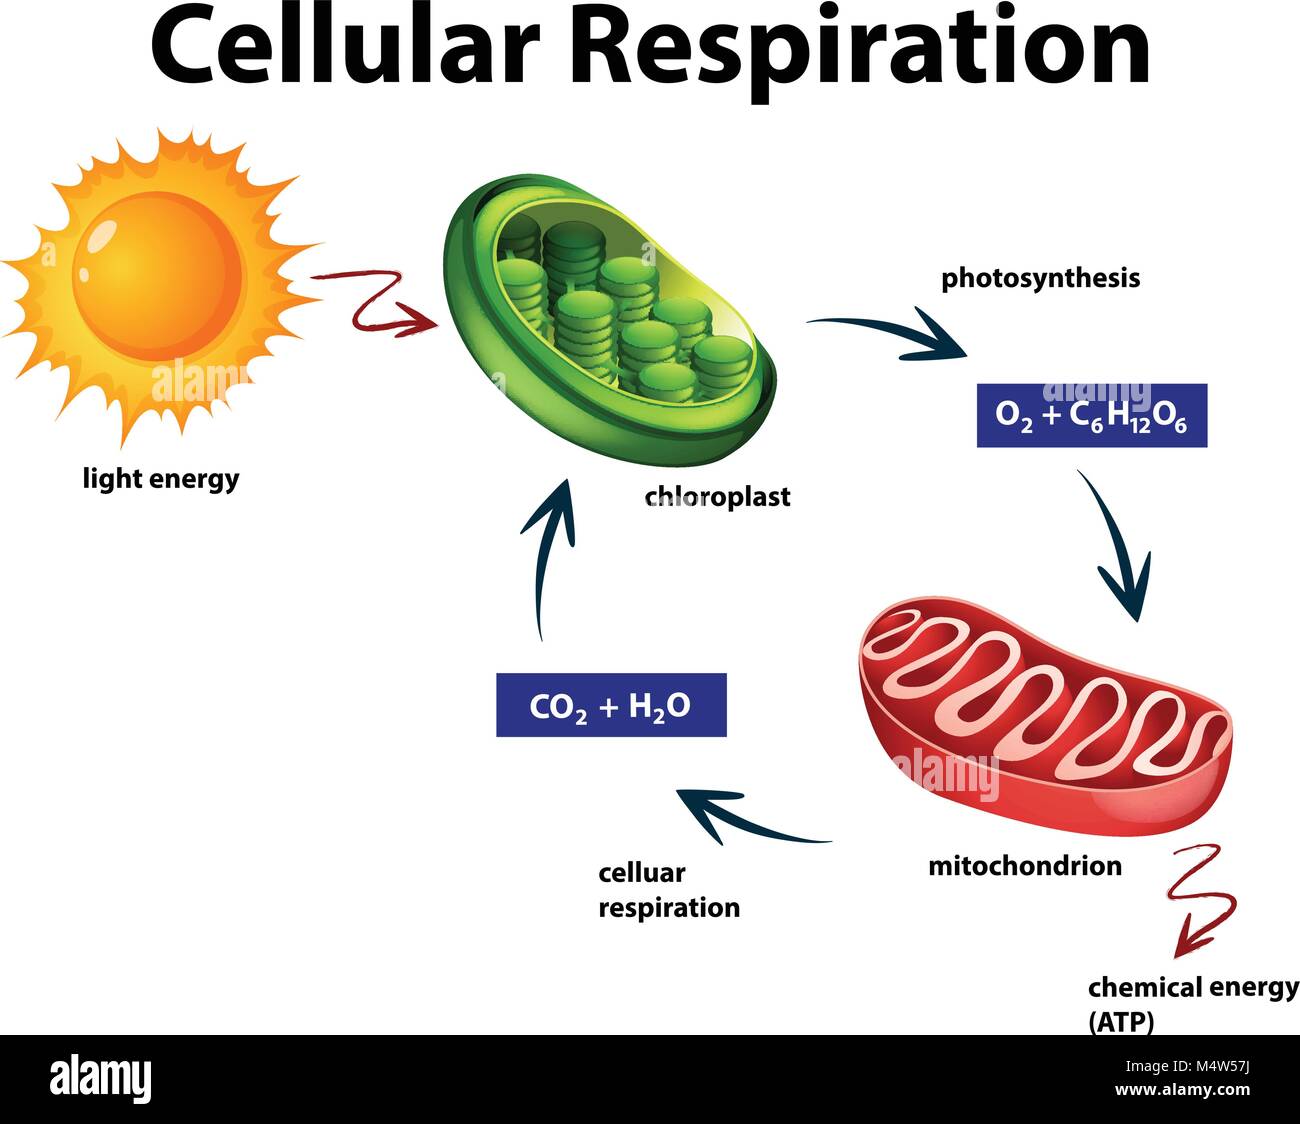 how are photosynthesis and cellular respiration related